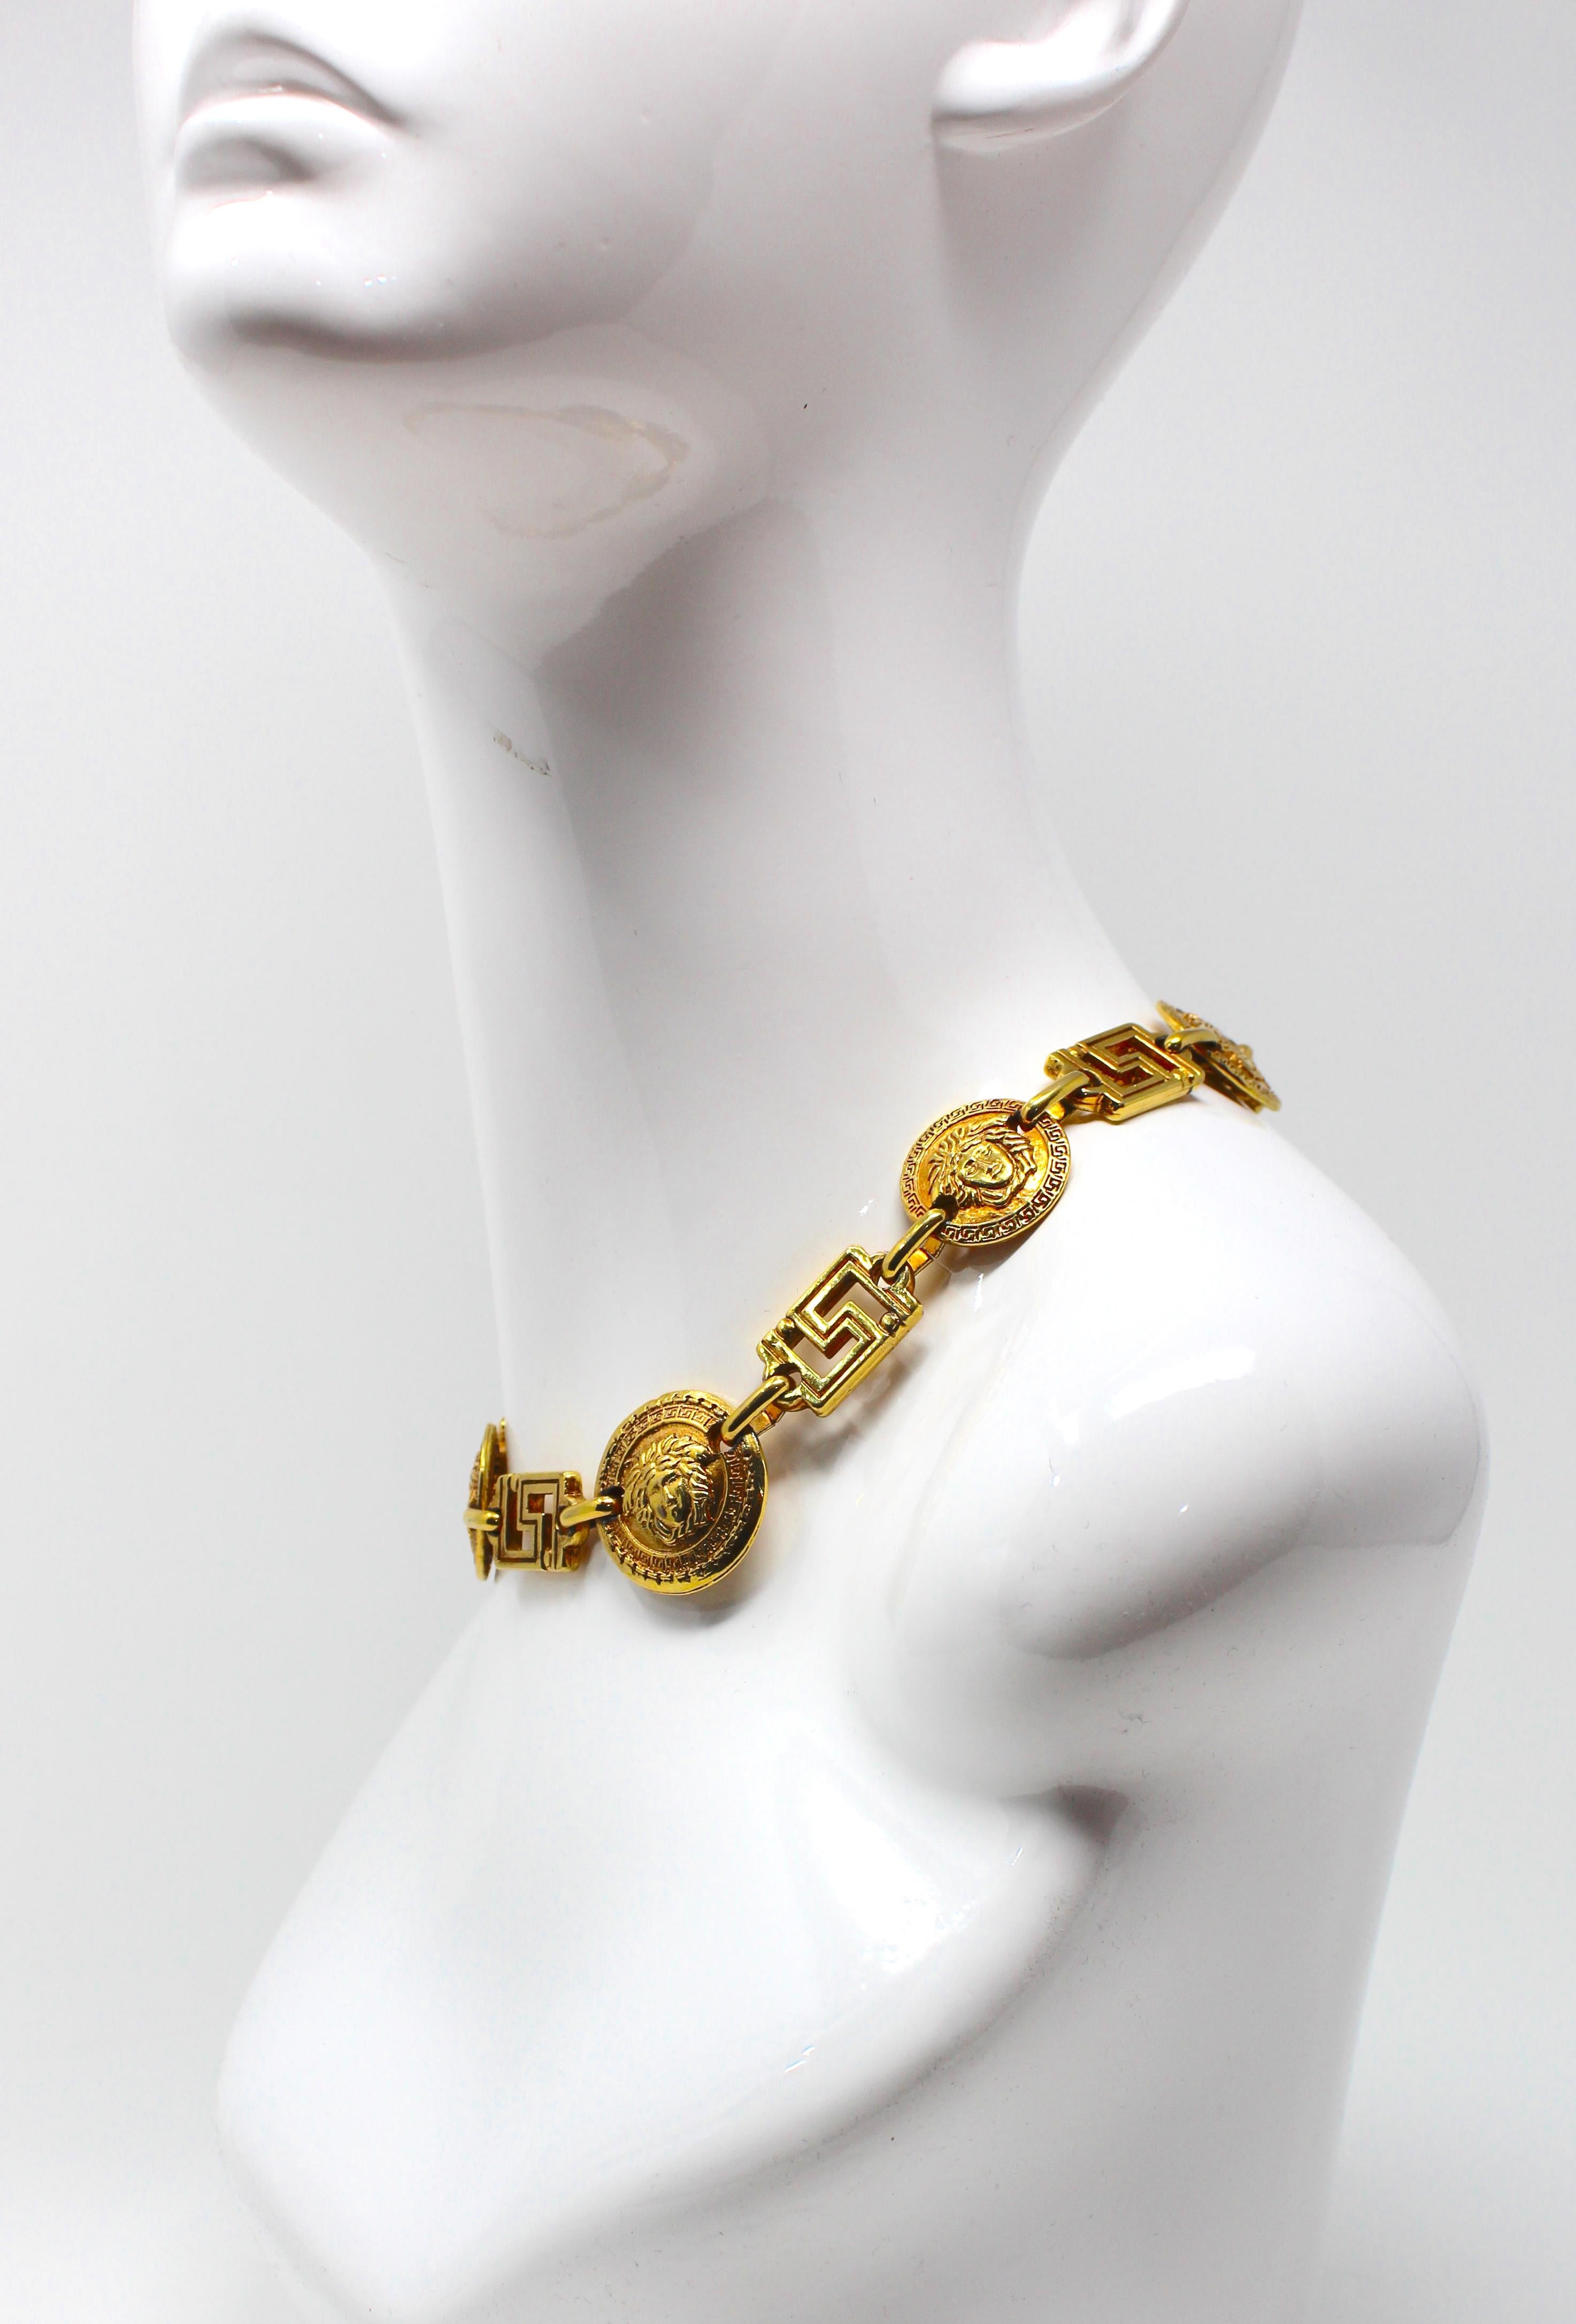 -Gianni Versace choker with Medusa medallions and greek keys
-Clasps with a mini medusa on the back
-Signed, made in Italy

Approximate Measurements
-17